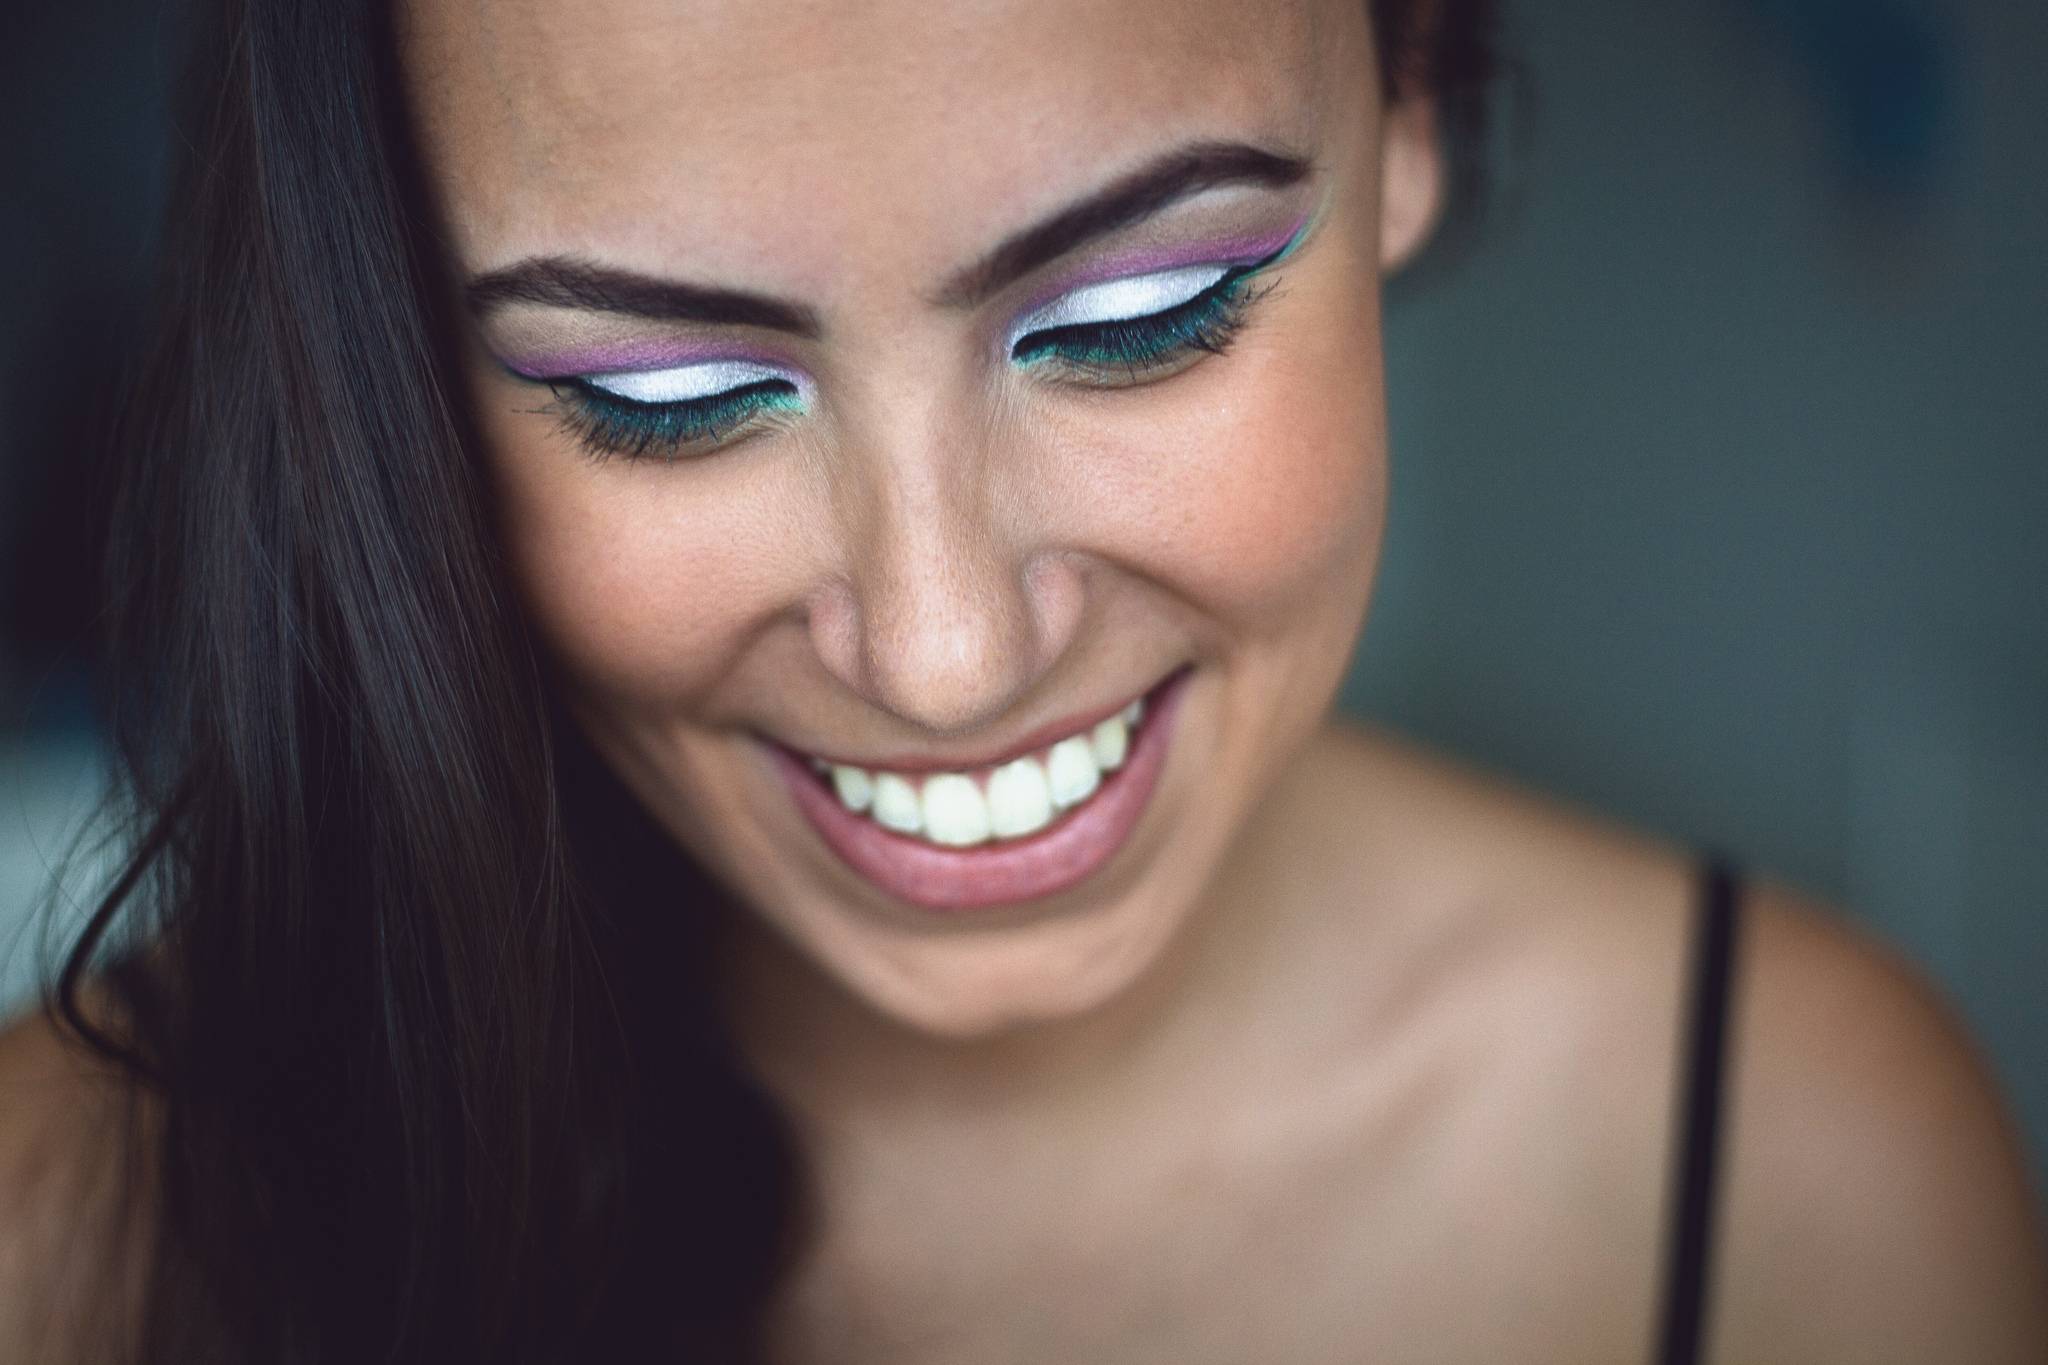 Science says make-up can make you happy